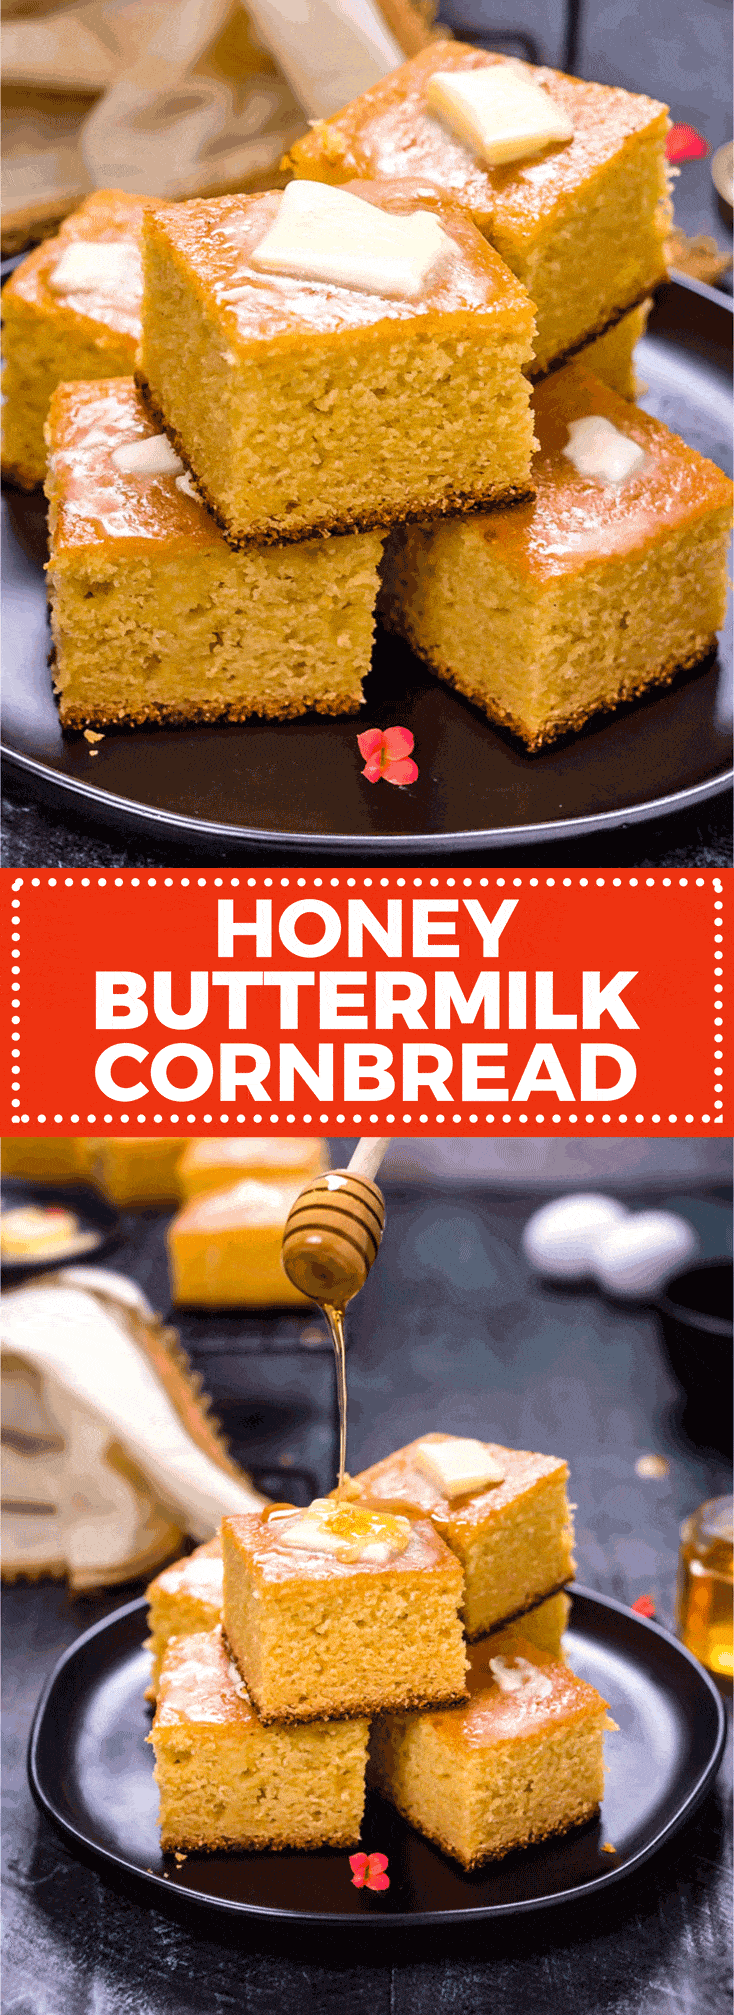 Honey Buttermilk Cornbread. This tender and sweet cornbread makes the perfect side for a summer BBQ or Thanksgiving dinner. | hostthetoast.com